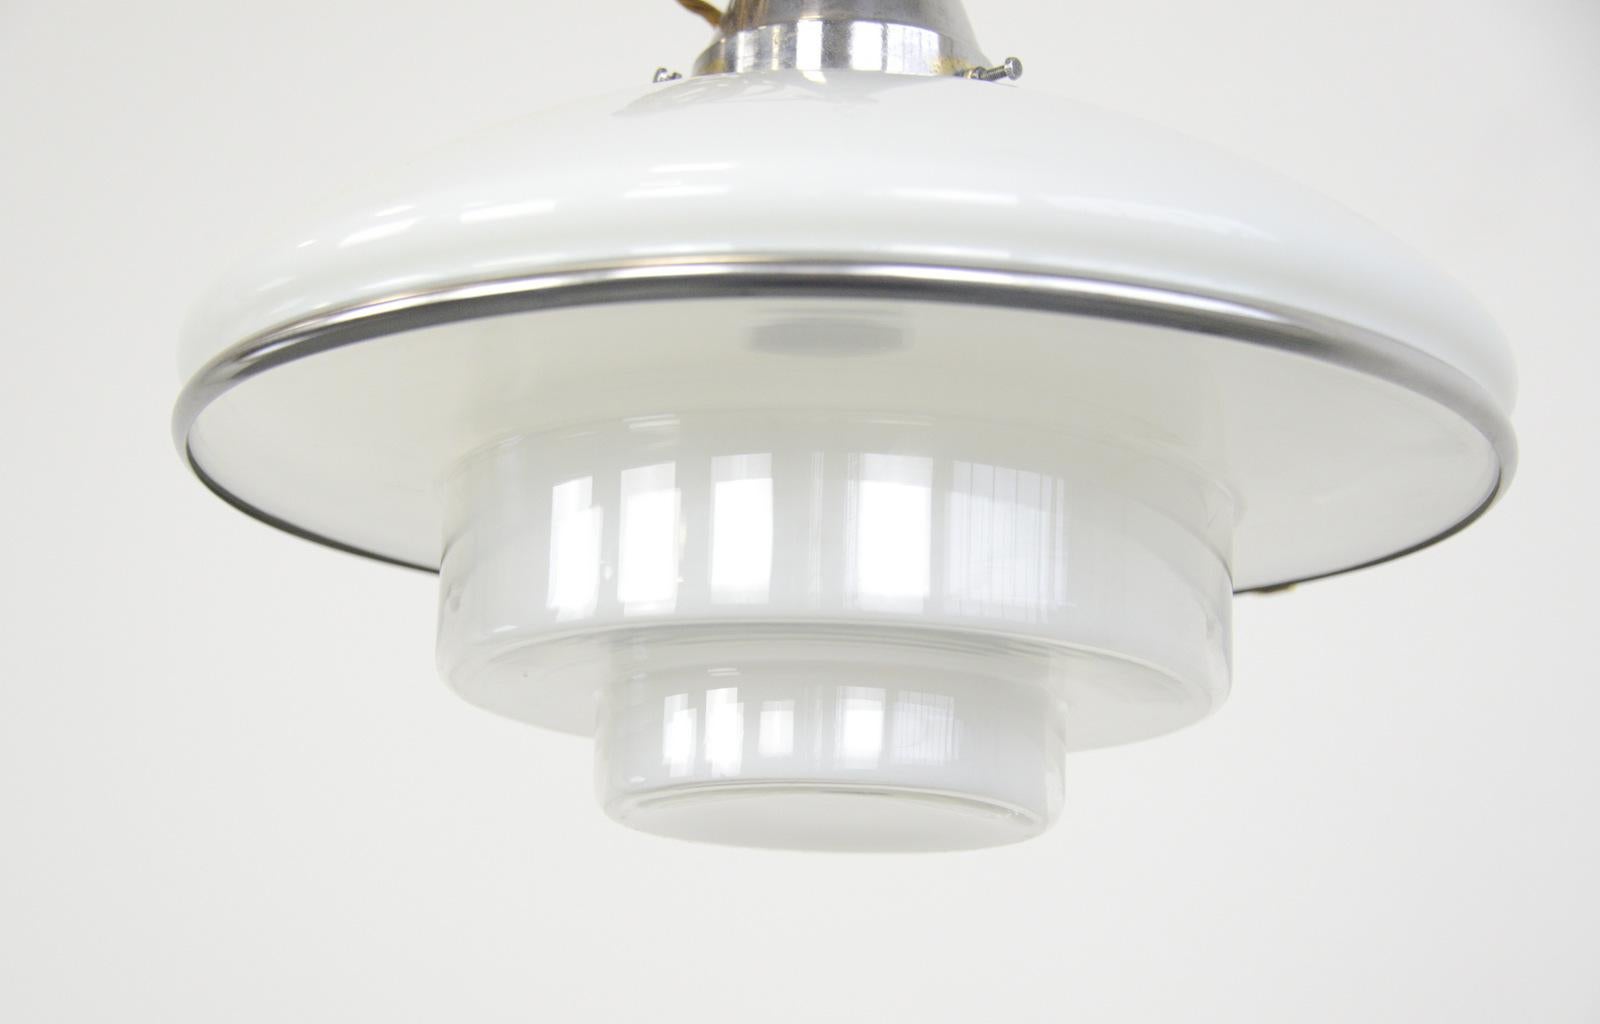 Sistra pendant light by Otto Muller, 1930s

- Original nickel coated brass gallery
- Opaline glass top with stepped glass base
- Takes E27 fitting bulbs
- Designed by Otto Muller for Sistra
- German, 1931
- Measures: 40 cm wide x 30 cm